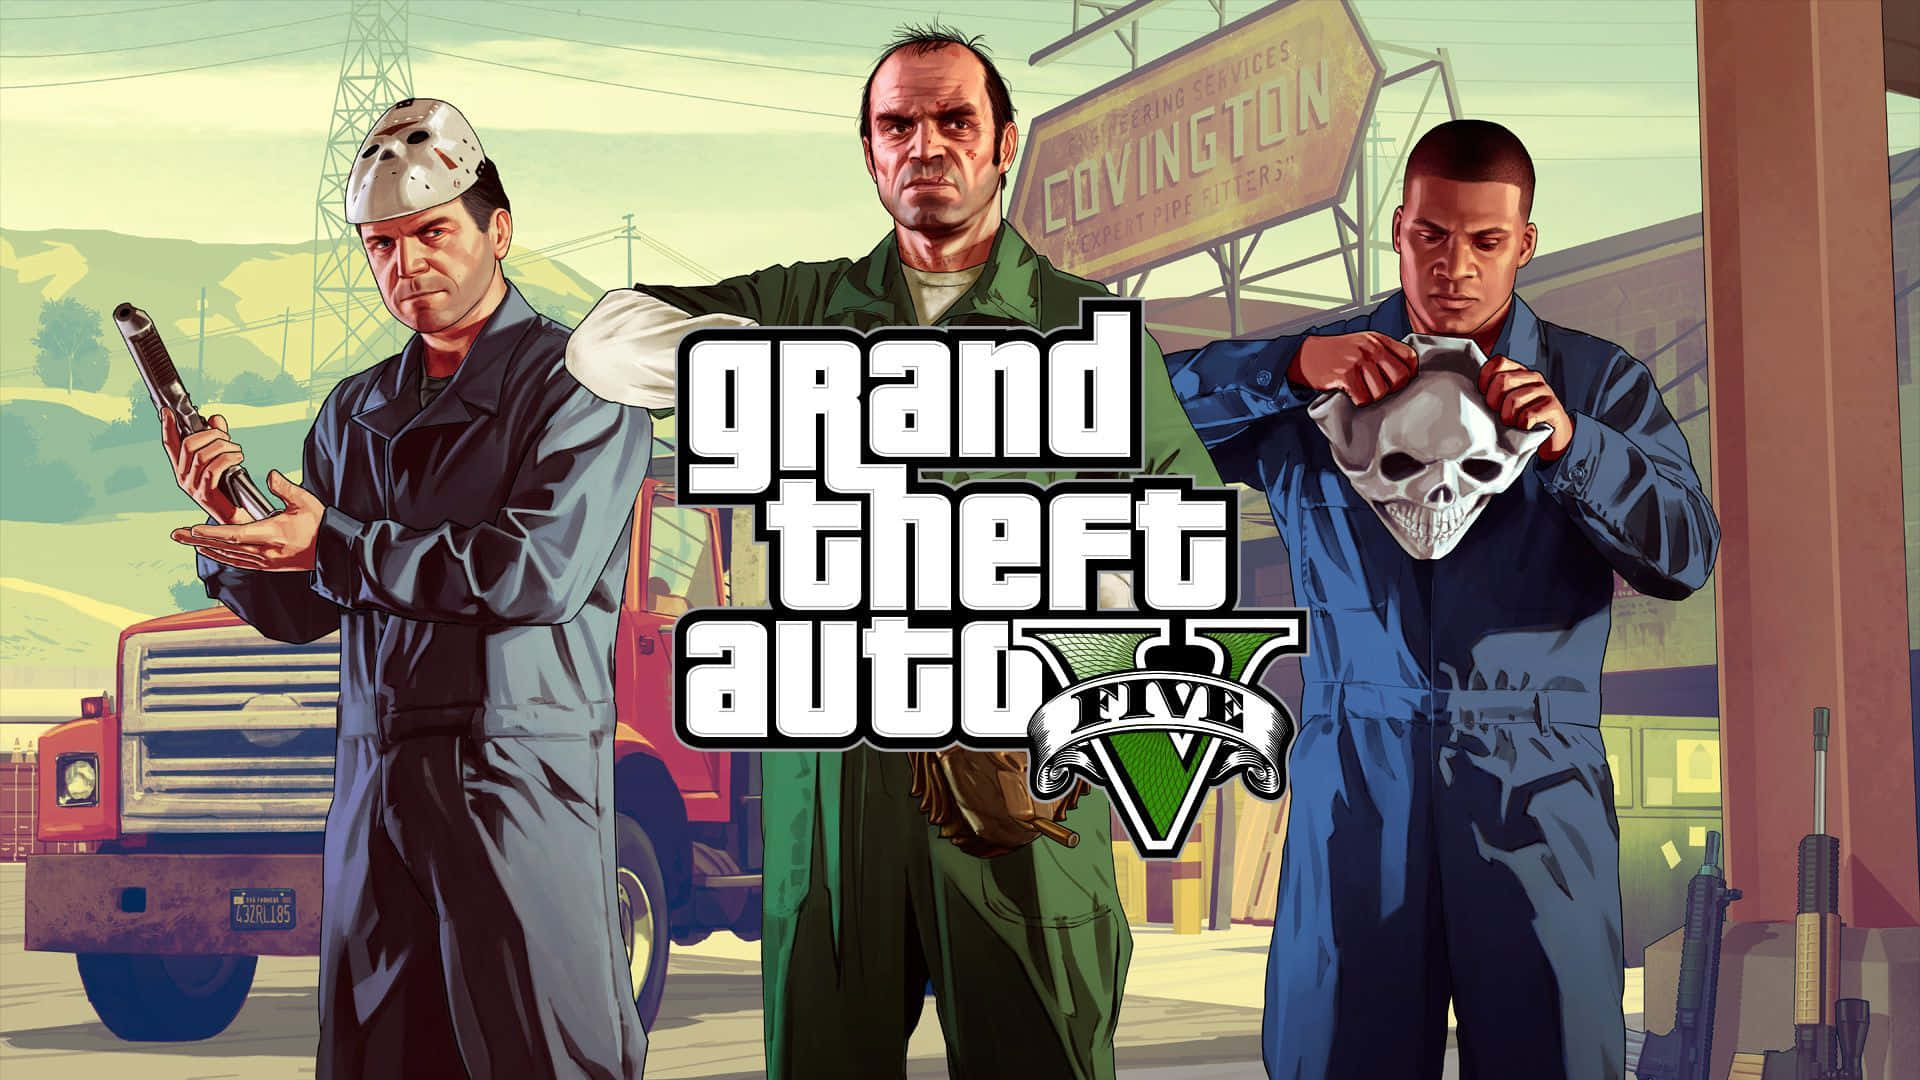 Grand Theft Auto 5: Strap On Your Seatbelt for an Adrenaline Filled Ride Wallpaper